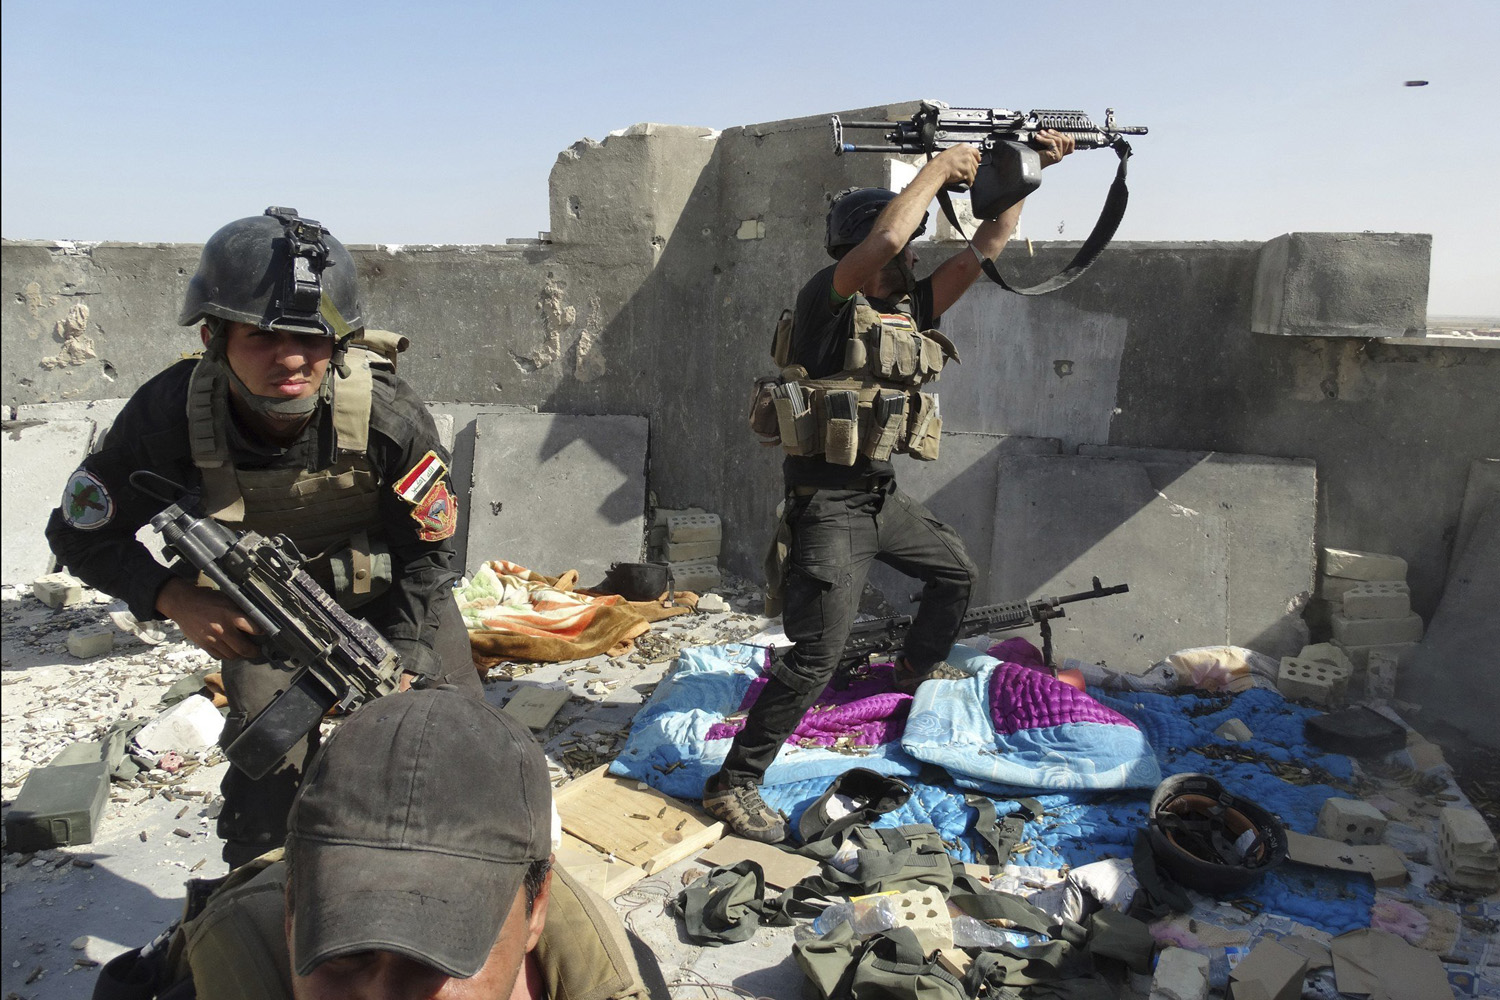 Jun. 19, 2014. Members of the Iraqi Special Operations Forces take their positions during clashes with the al Qaeda-linked Islamic State of Iraq and the Levant (ISIL) in the city of Ramadi.